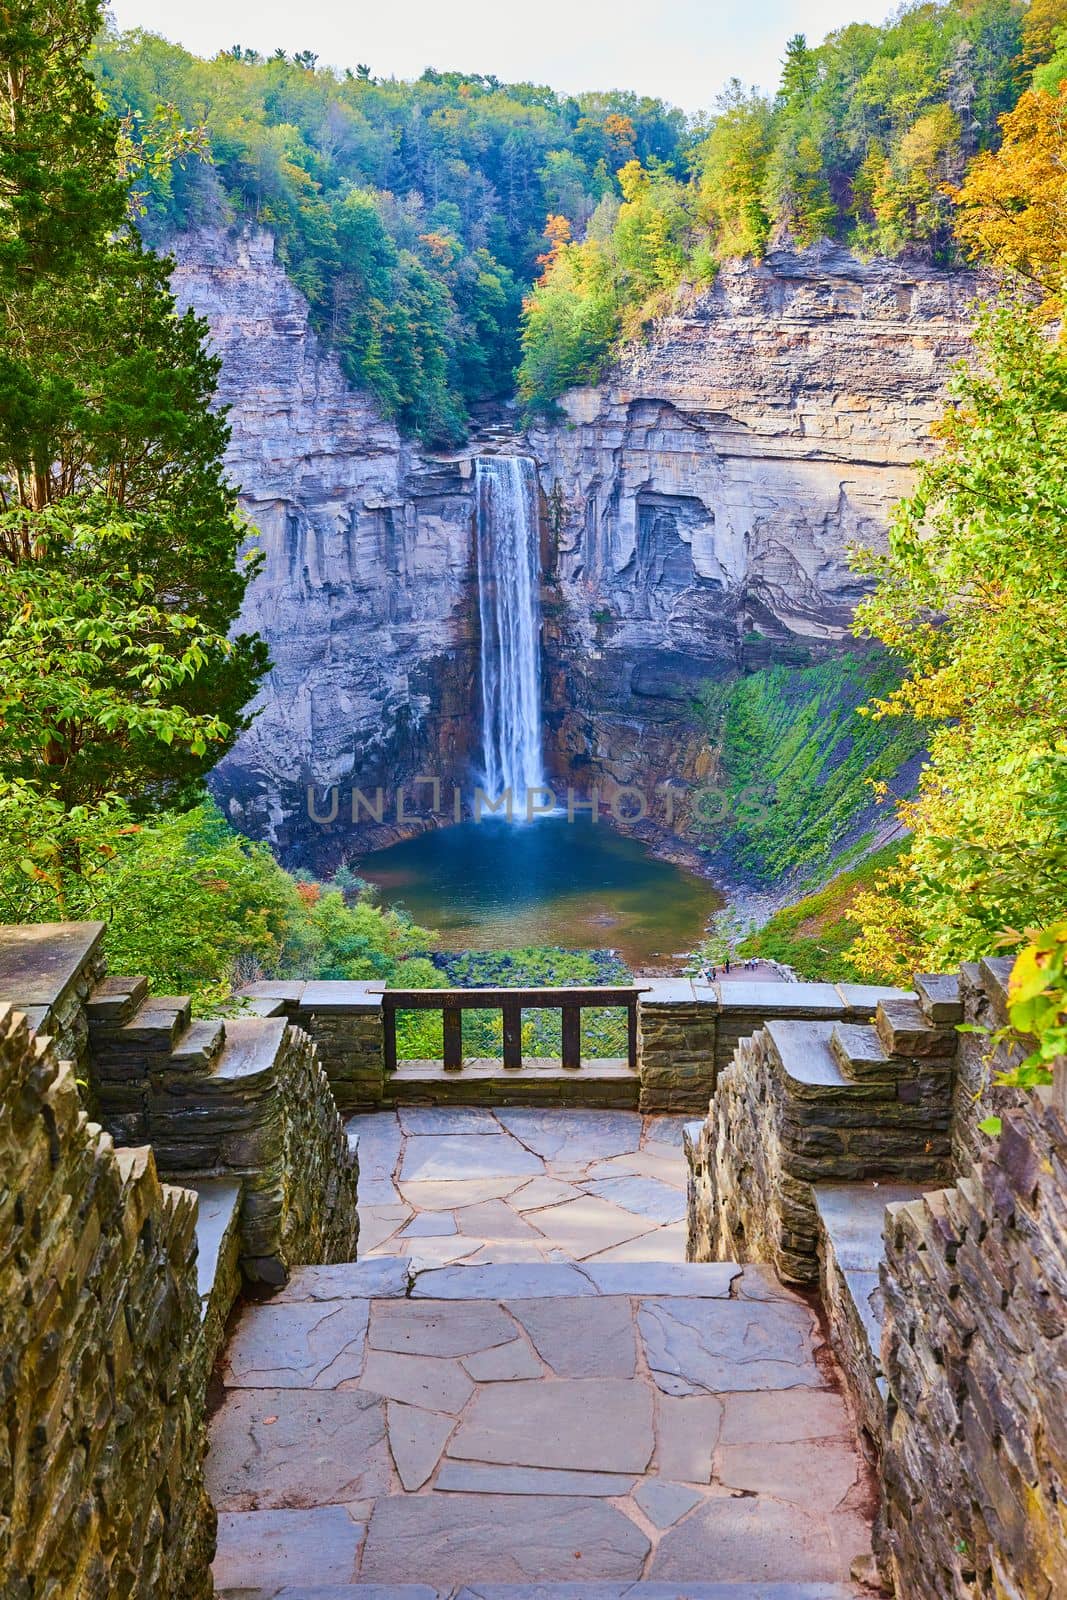 Image of Stone steps lead to overlook of huge waterfall into canyon surrounded by fall foliage